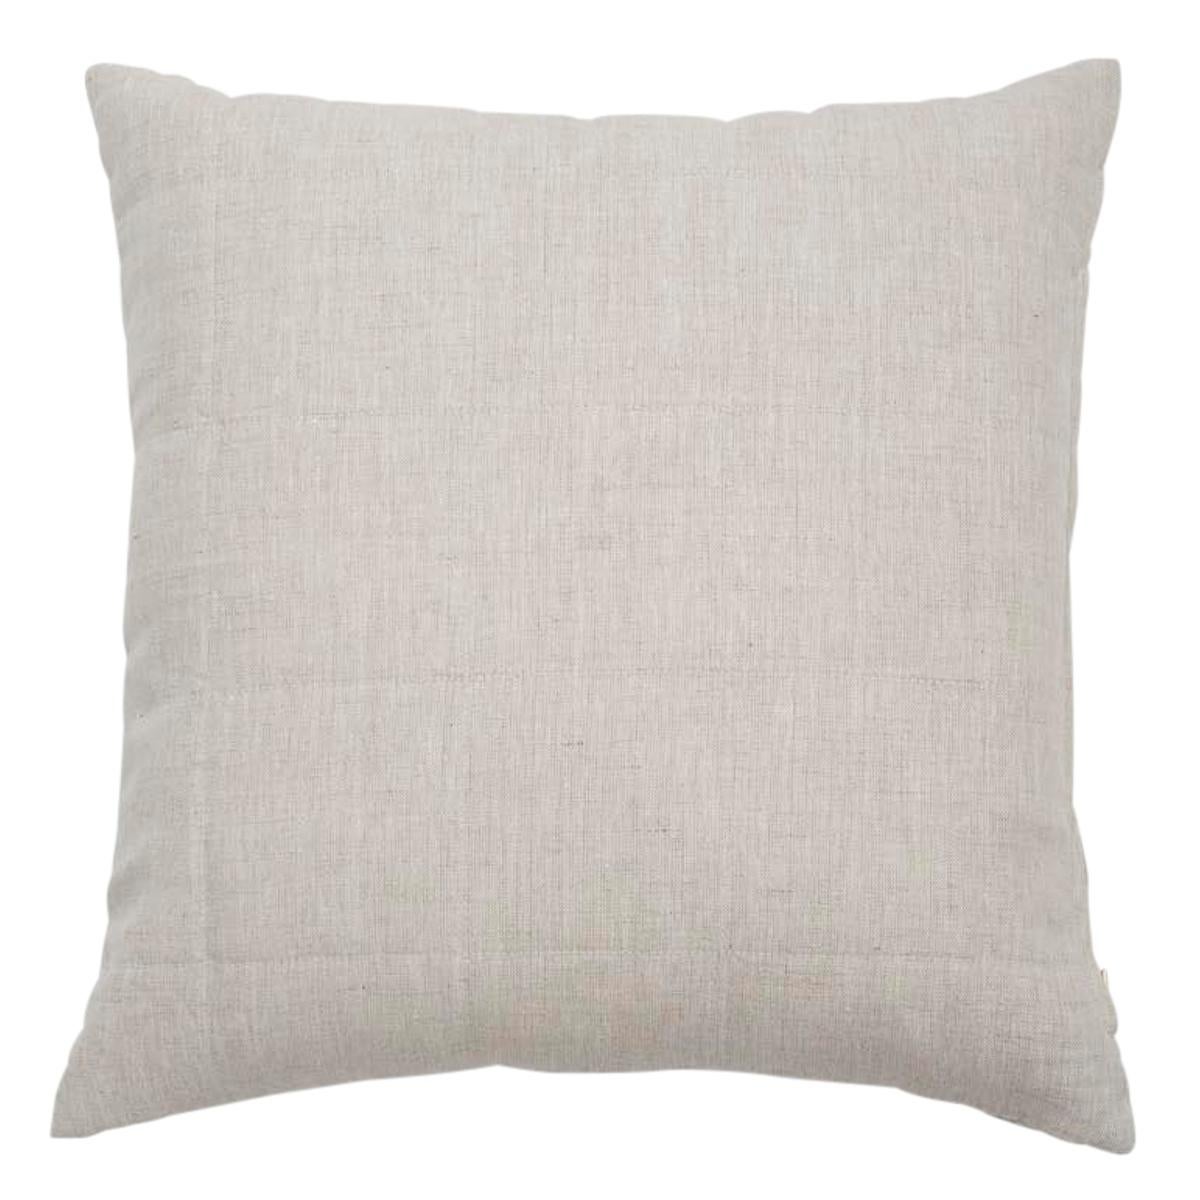 This pillow features Joshua Tree by Caroline Z Hurleywith a knife edge finish. Designed by Caroline Z Hurley in her Brooklyn studio and block-printed in New Bedford, Massachusetts. Each shape is cut and individually stamped onto the linen by hand.